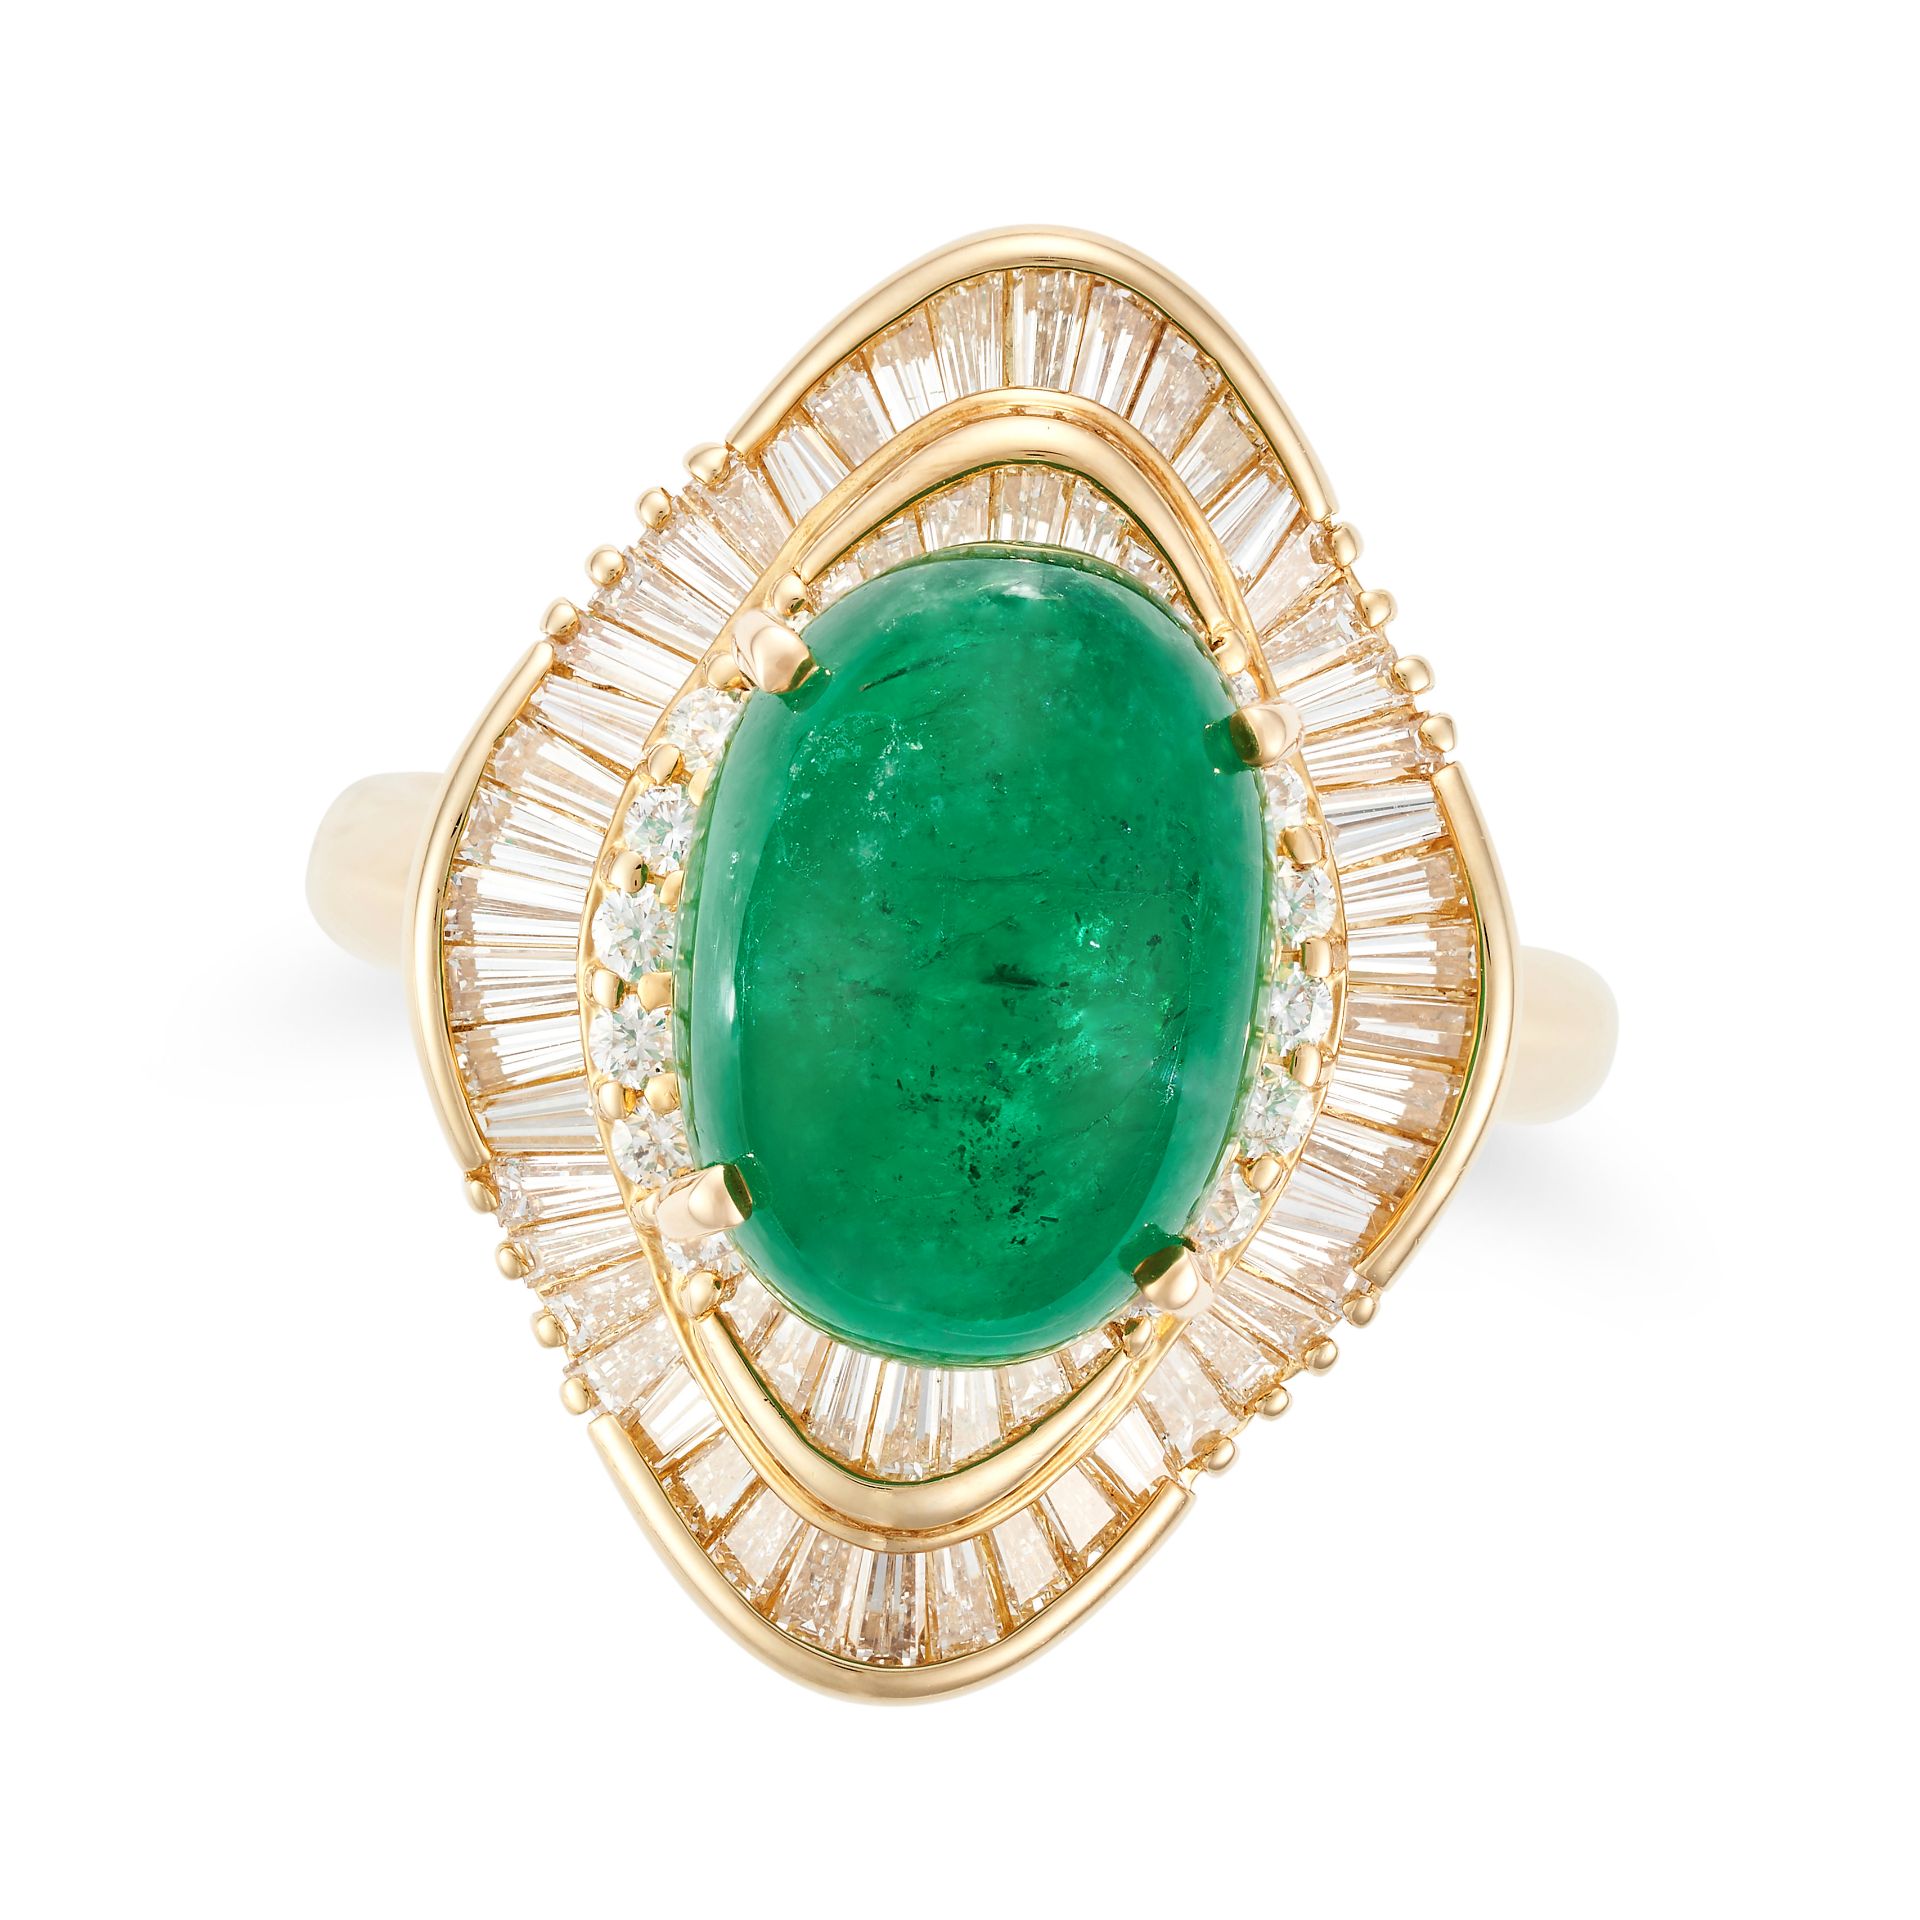 AN EMERALD AND DIAMOND BALLERINA RING set with an oval cabochon emerald of 8.10 carats in a balle...